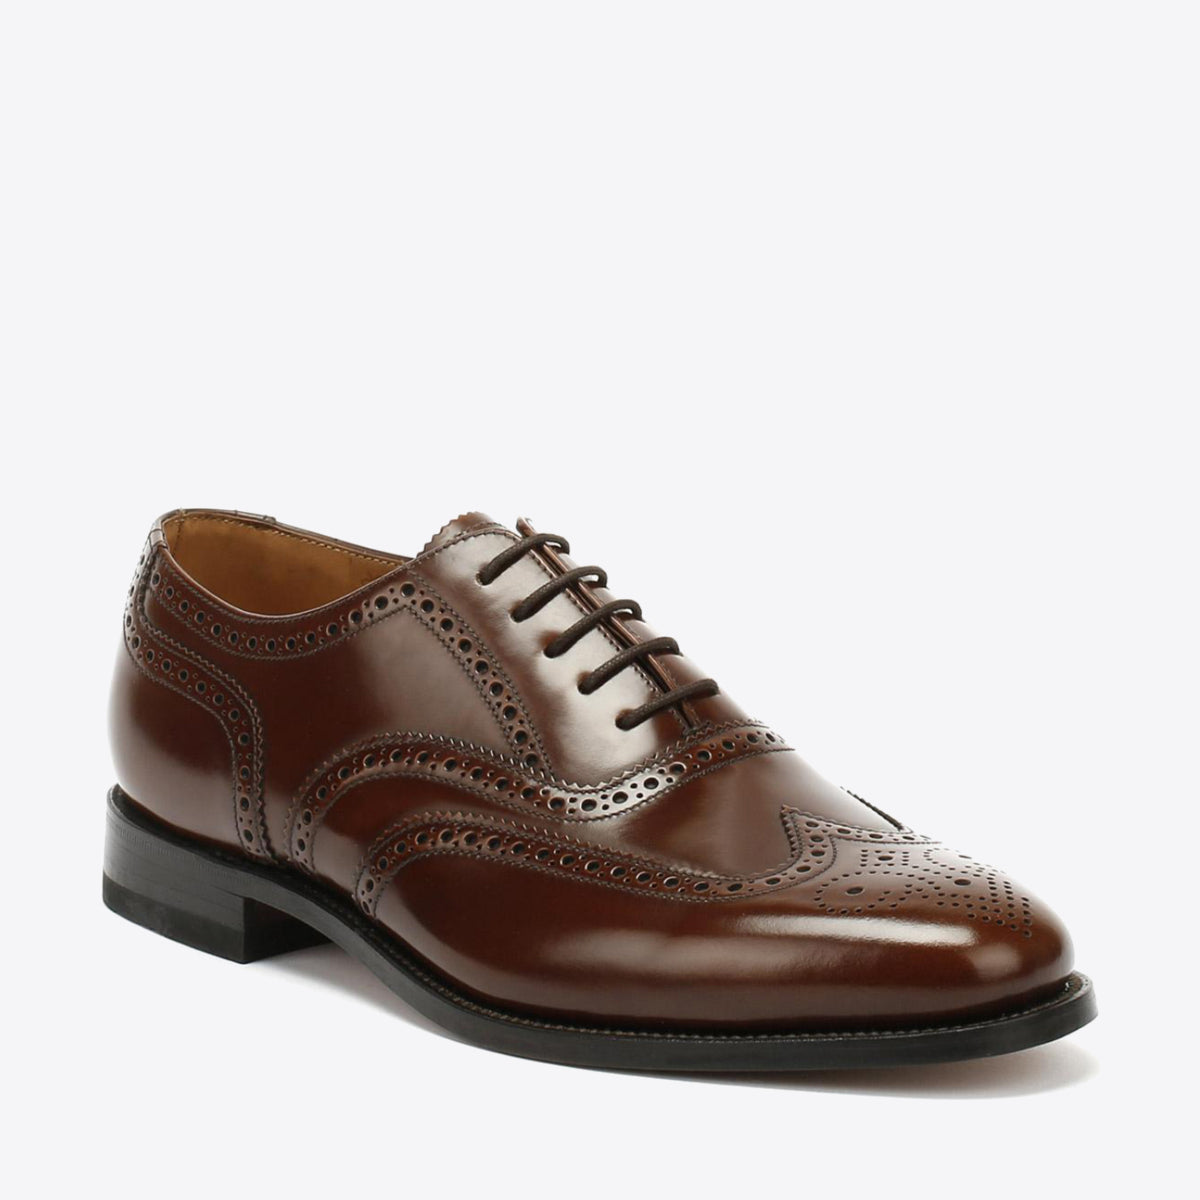  202T Brogue Lace Brown Leather